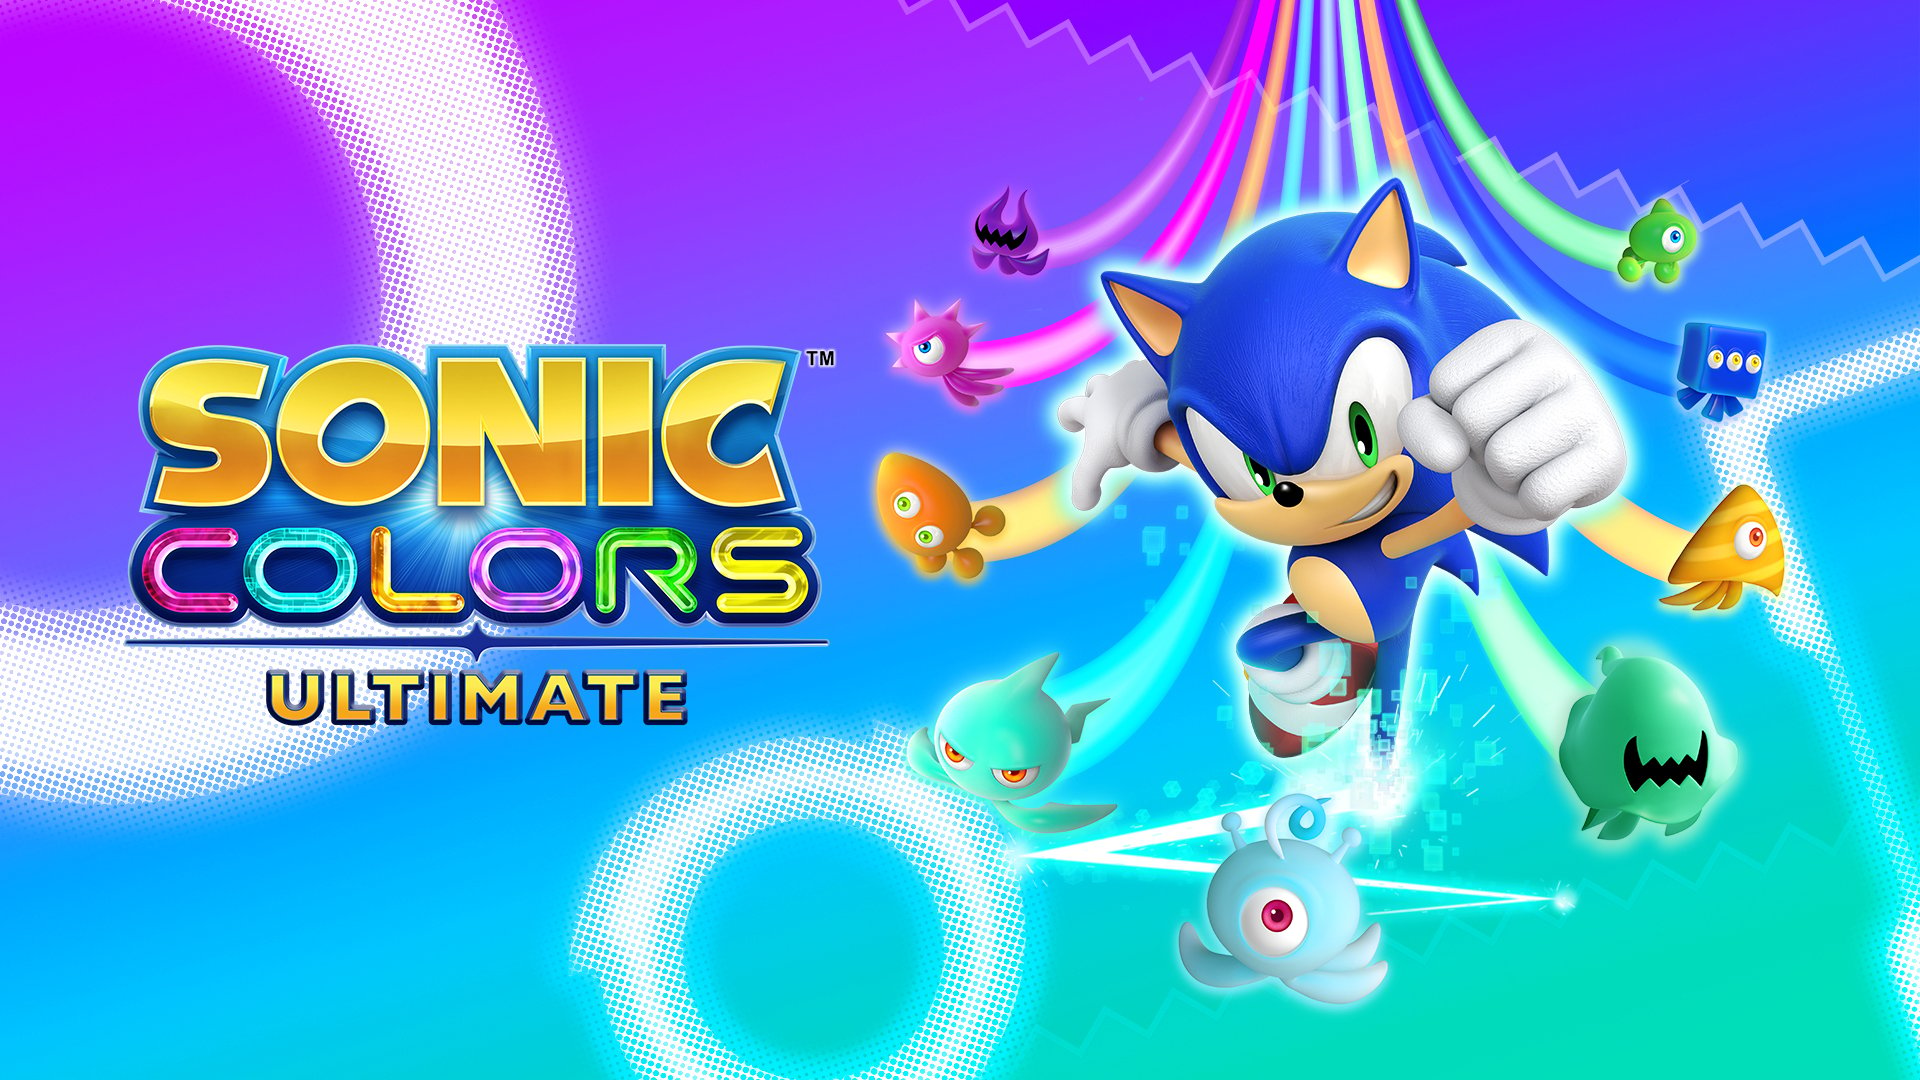 Sonic Colors: Rise of the Wisps Finale Released